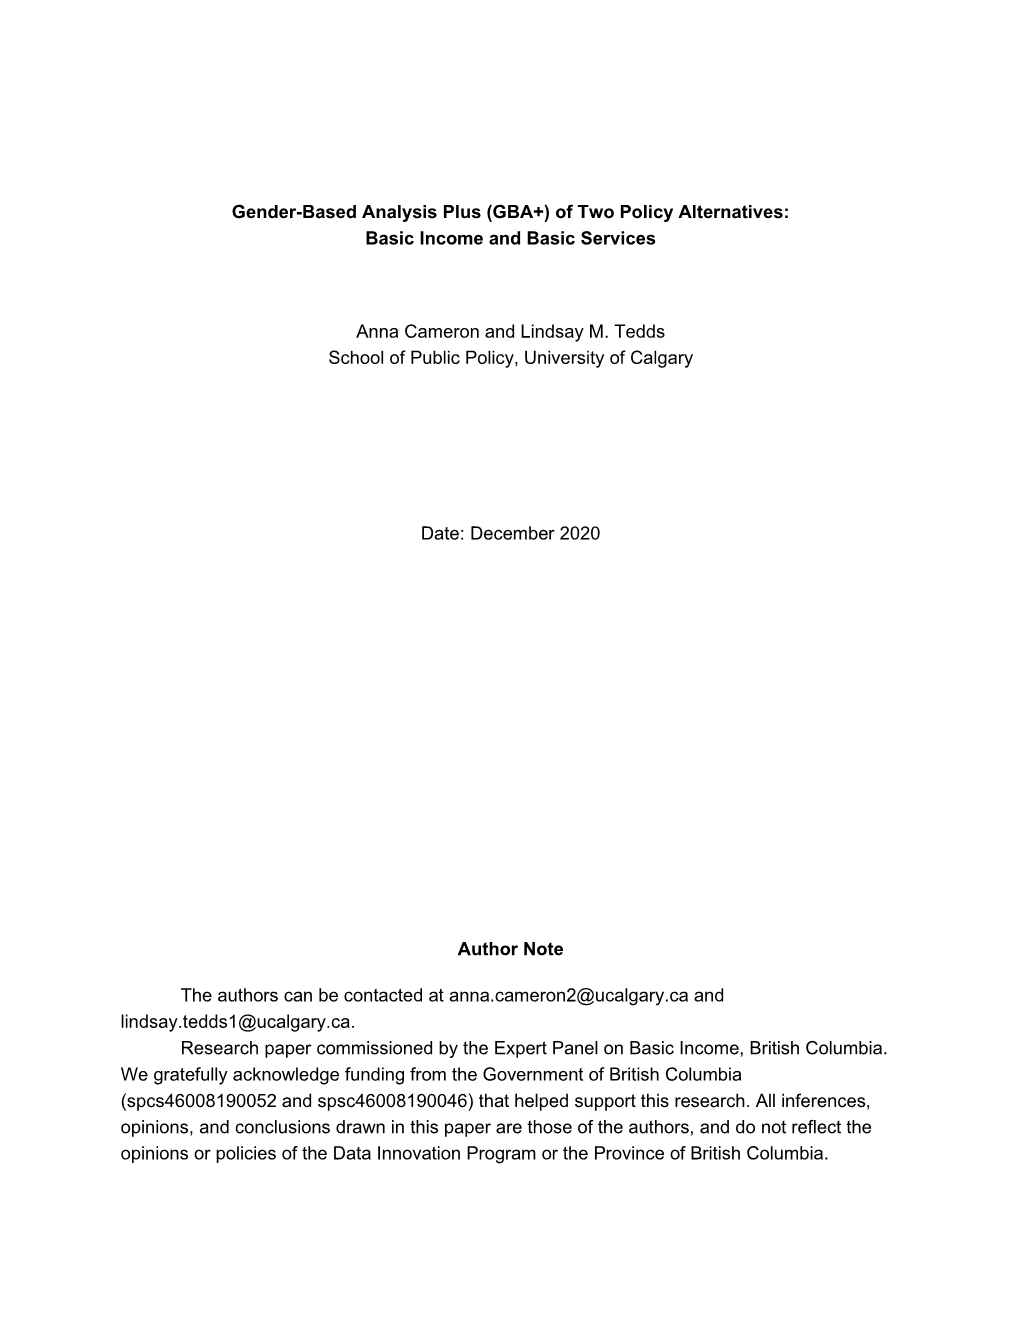 Gender-Based Analysis Plus of Two Policy Alternatives: Basic Income and Basic Services